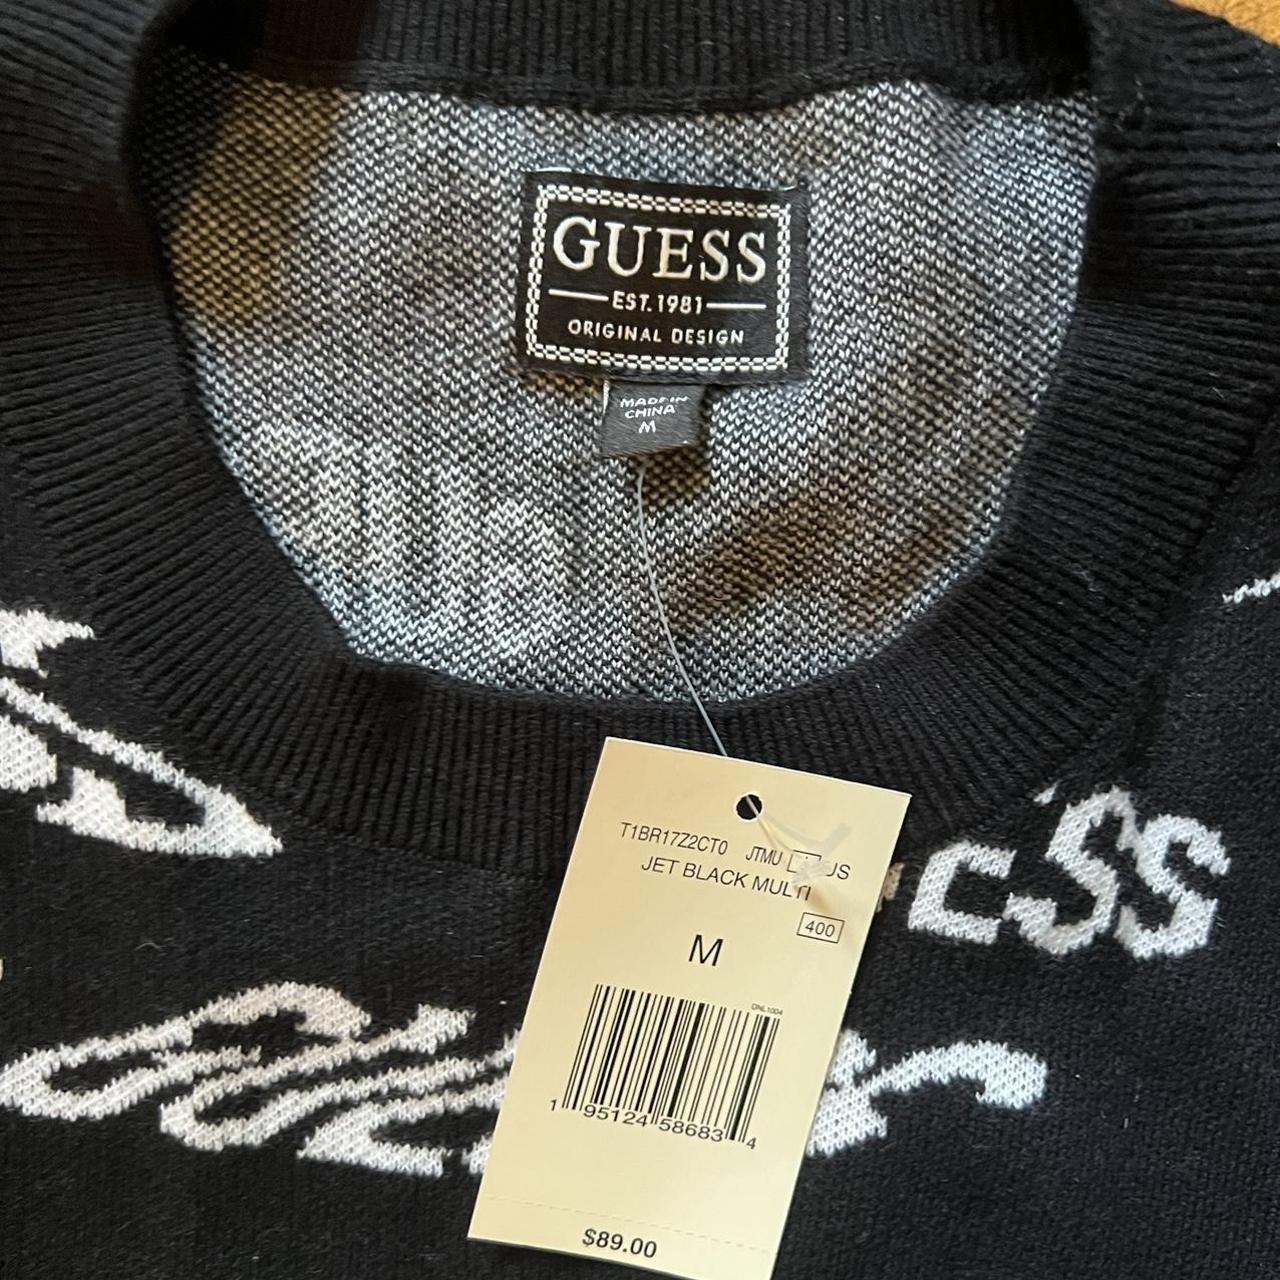 Guess Women's Black and White Jumper (2)